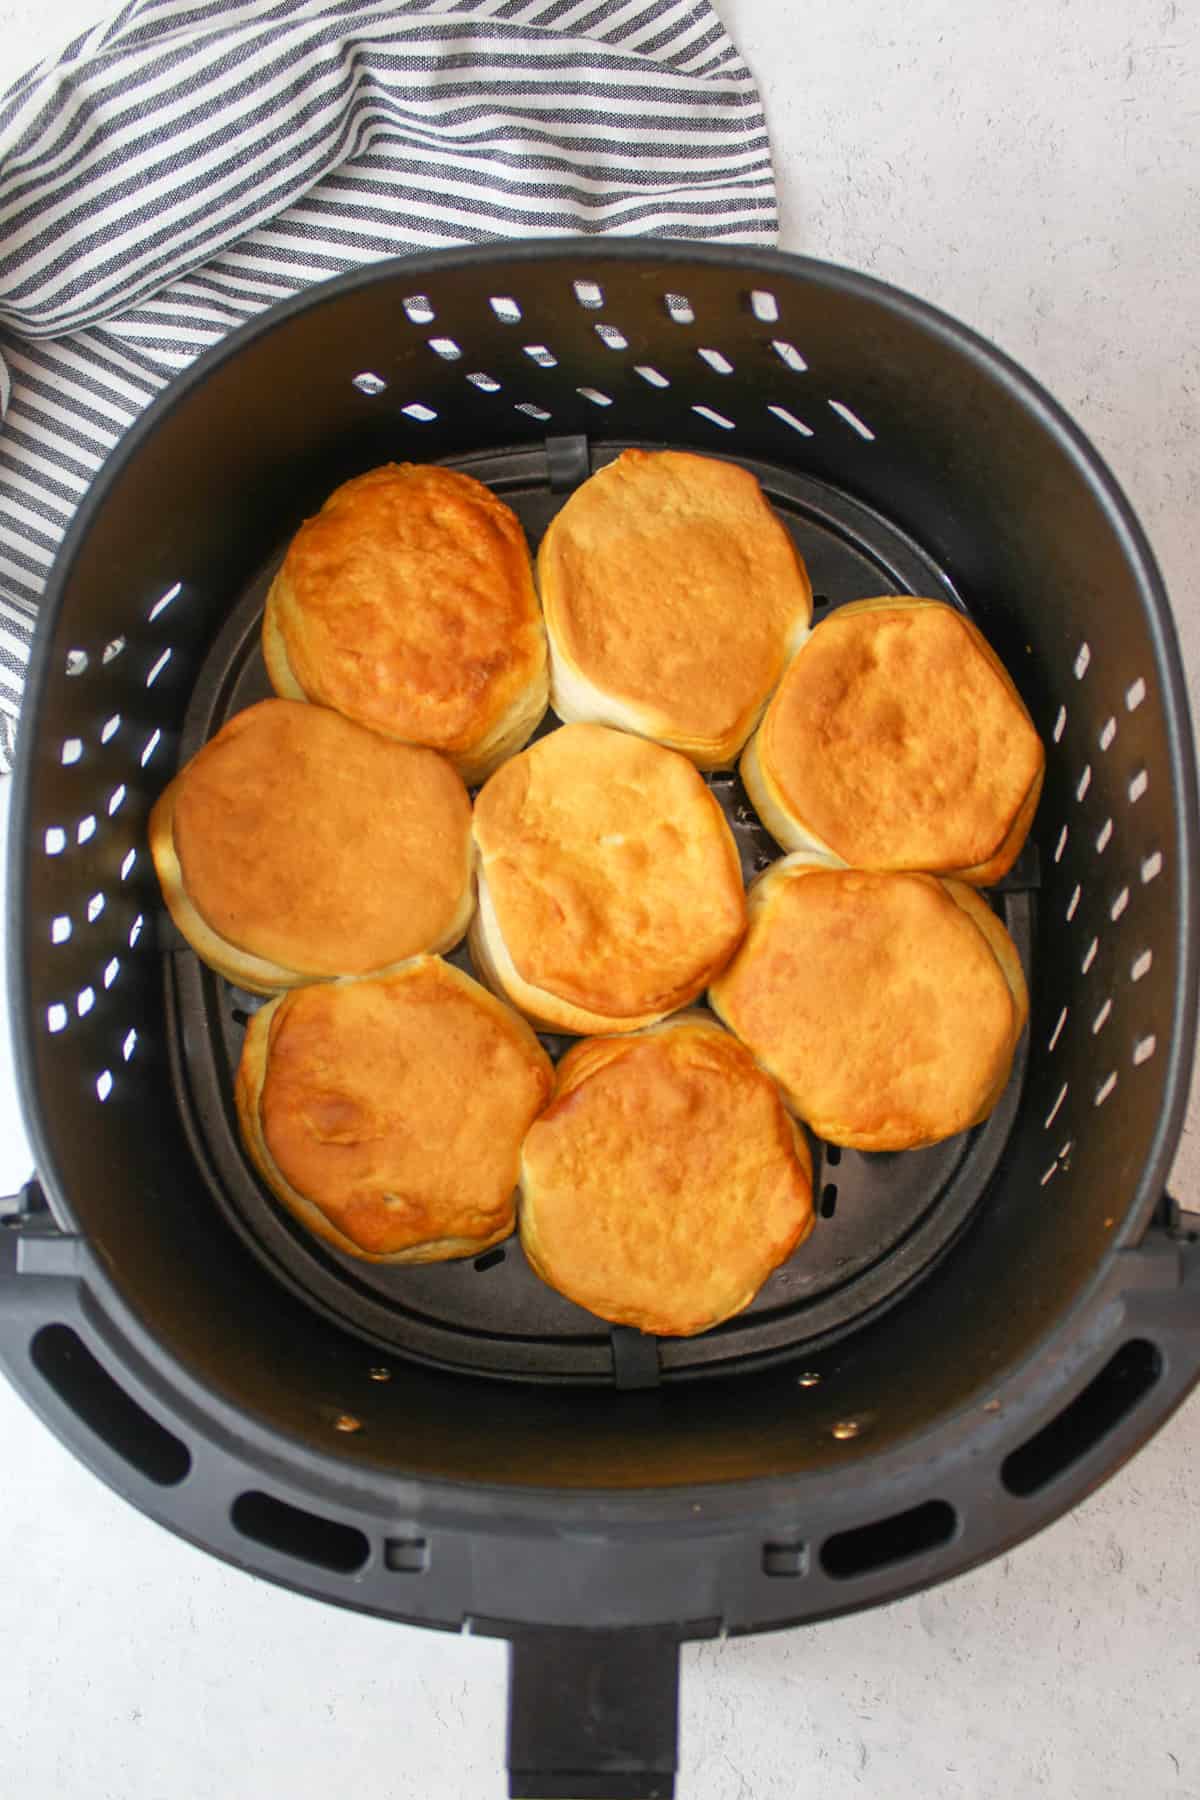 https://storables.com/wp-content/uploads/2023/07/how-long-to-cook-biscuits-in-air-fryer-1689425213.jpg